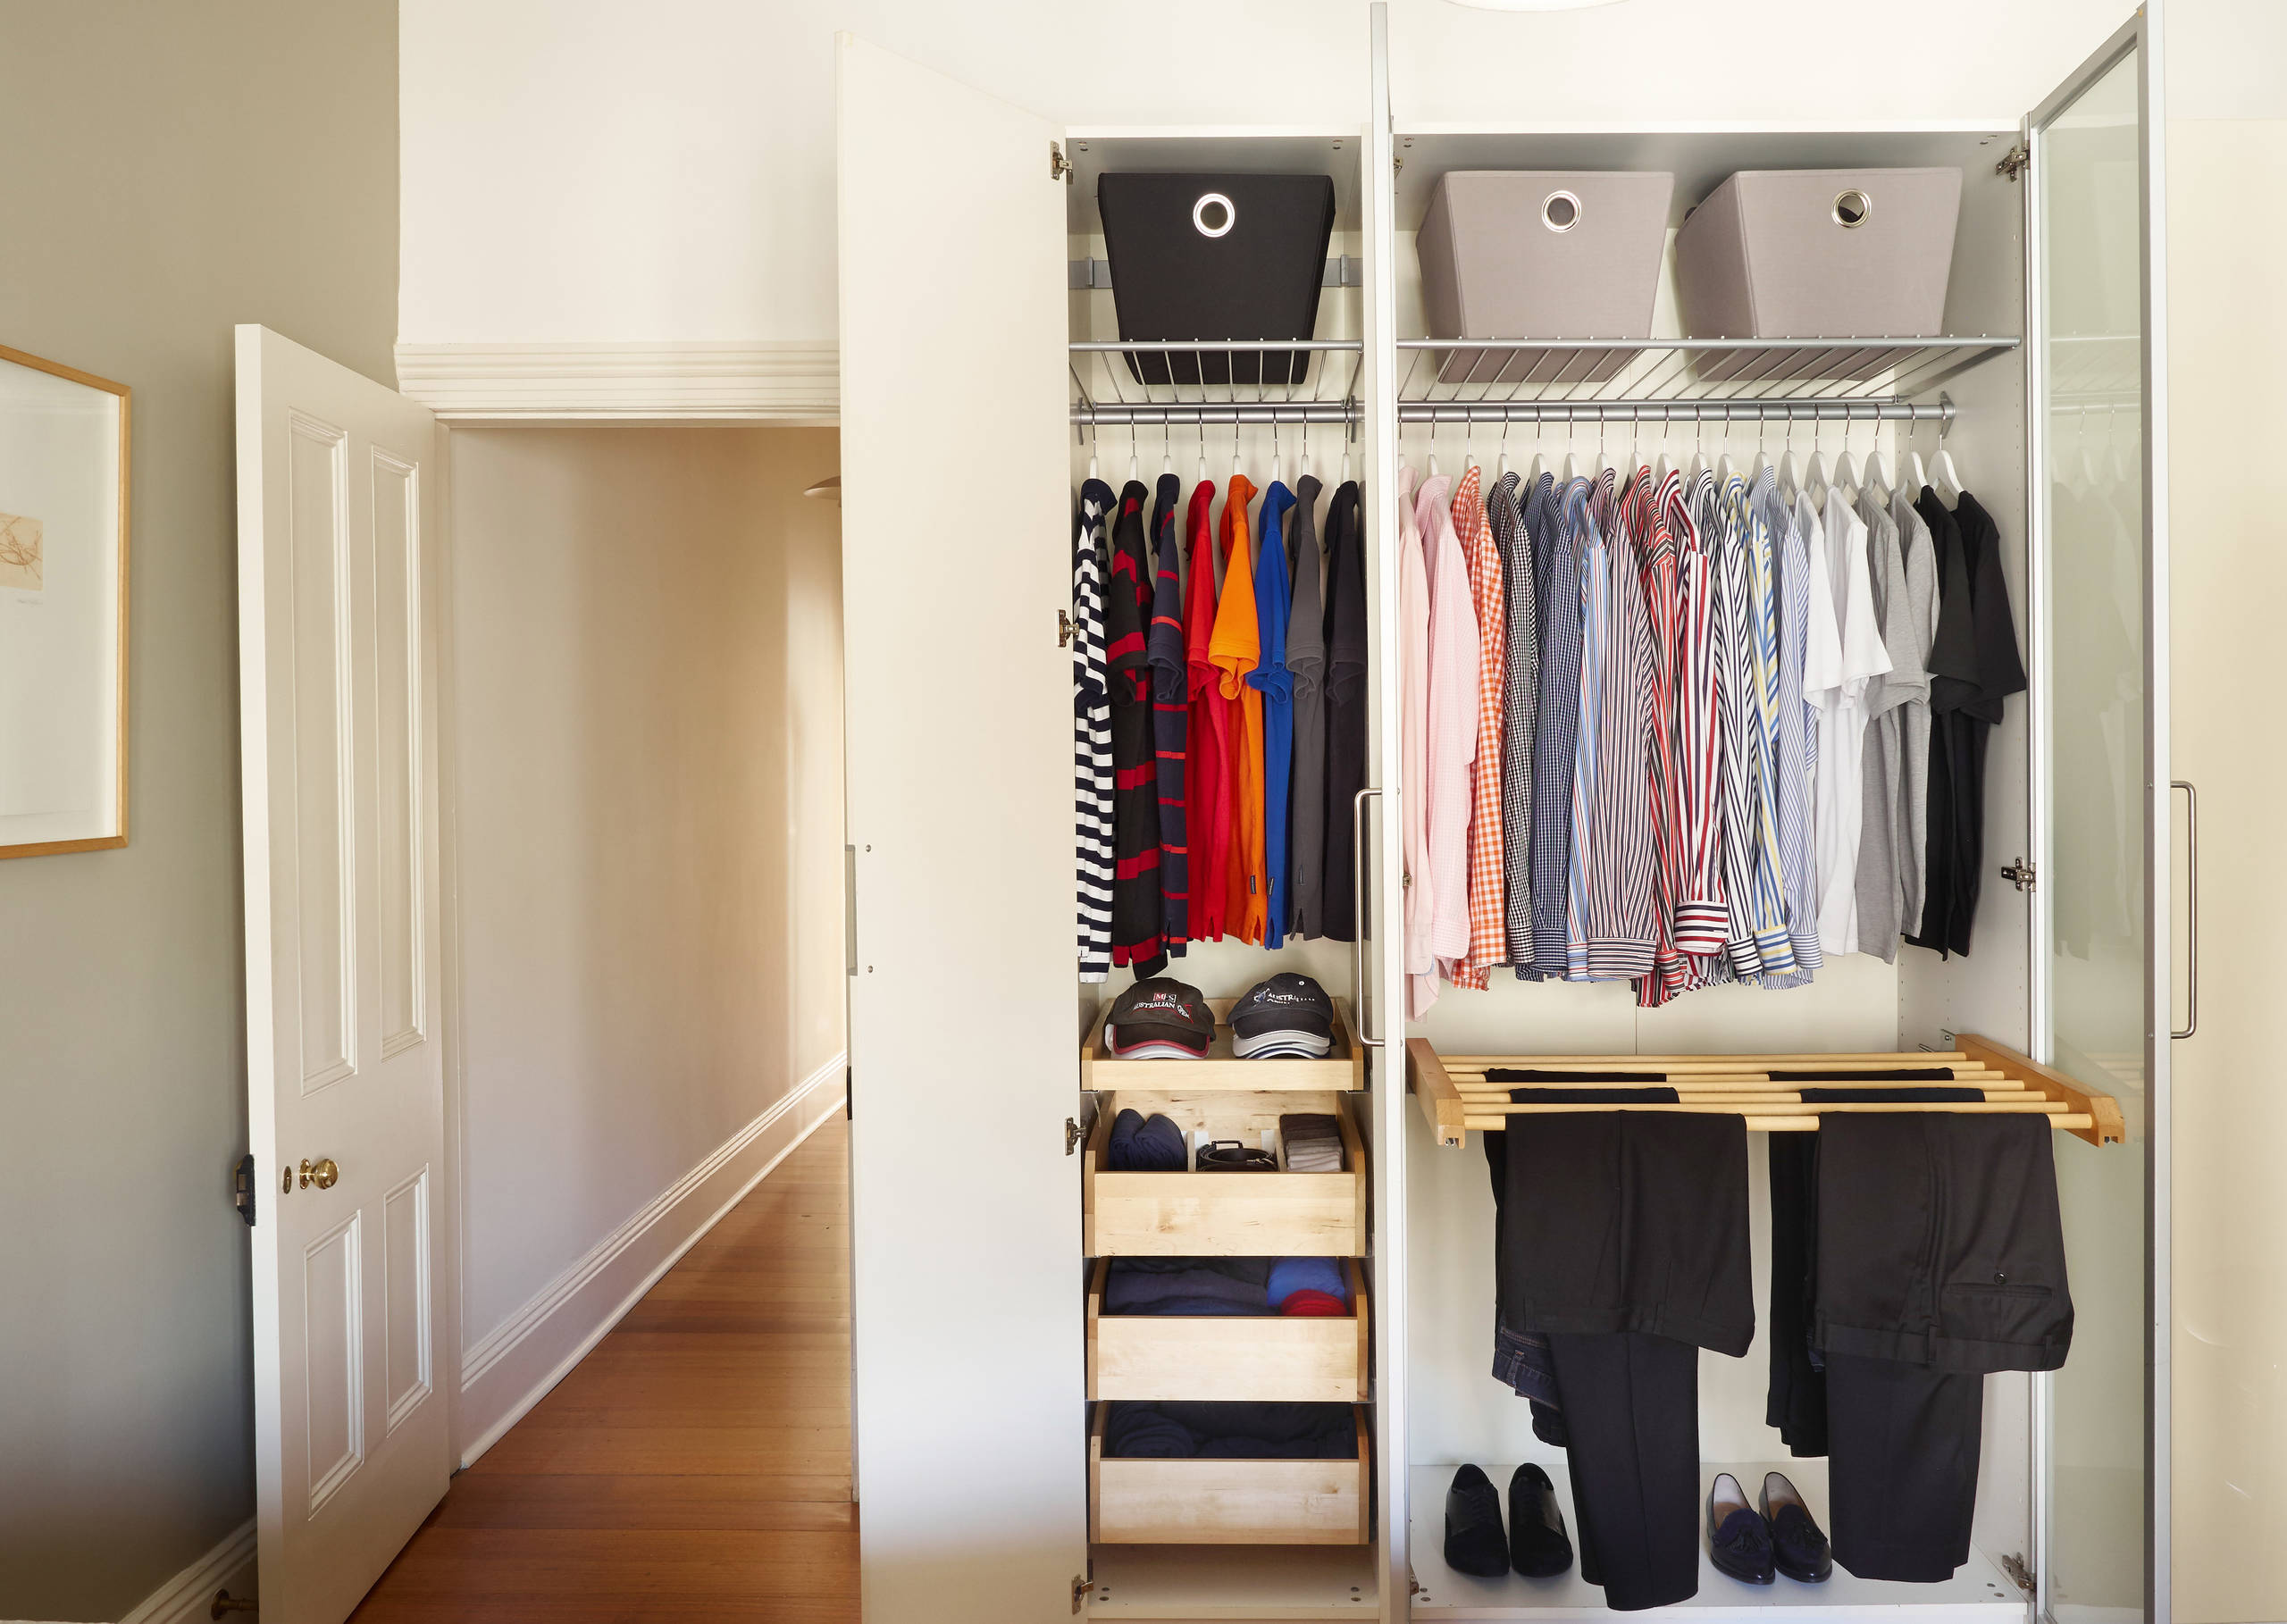 Storing Winter Clothes - Storage Solutions